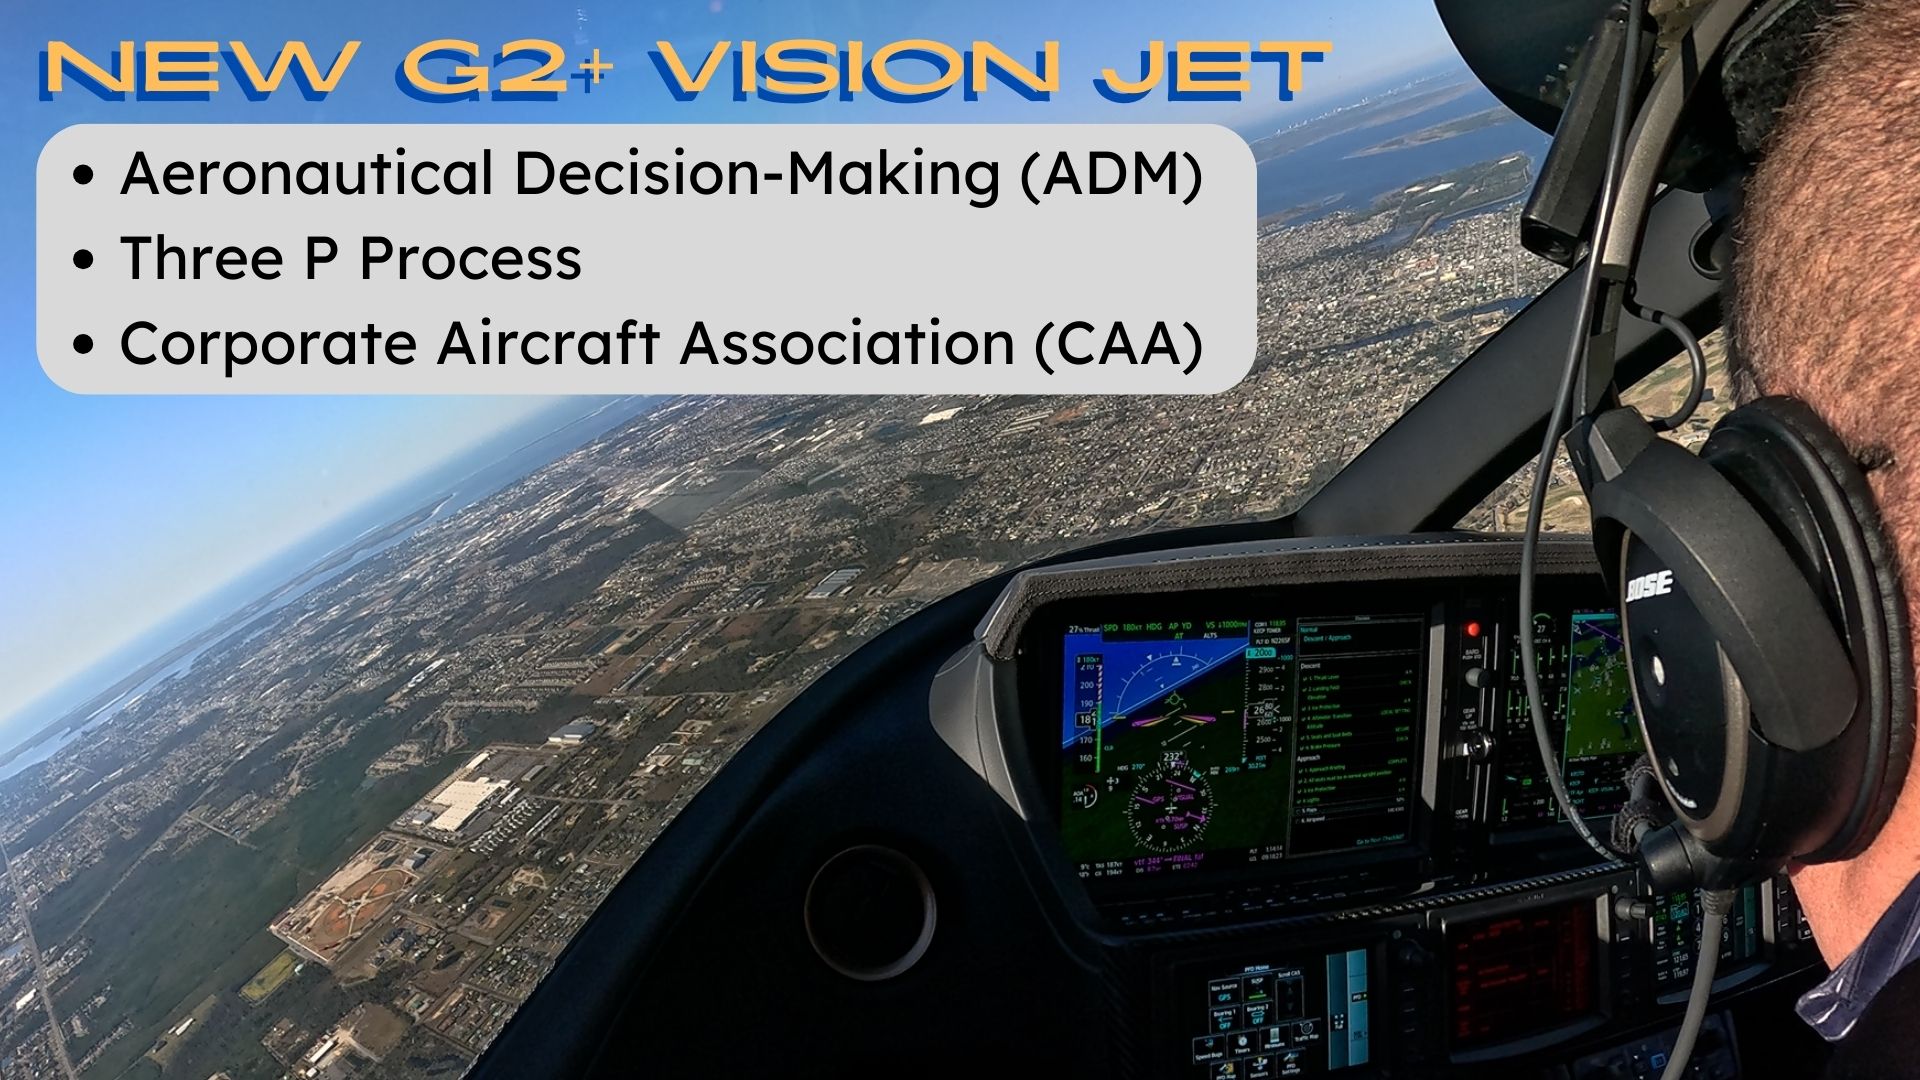 Flying a New G2+ Vision Jet, CAA Fuel Prices and 3-P Aeronautical Decision Making Tips (Video)